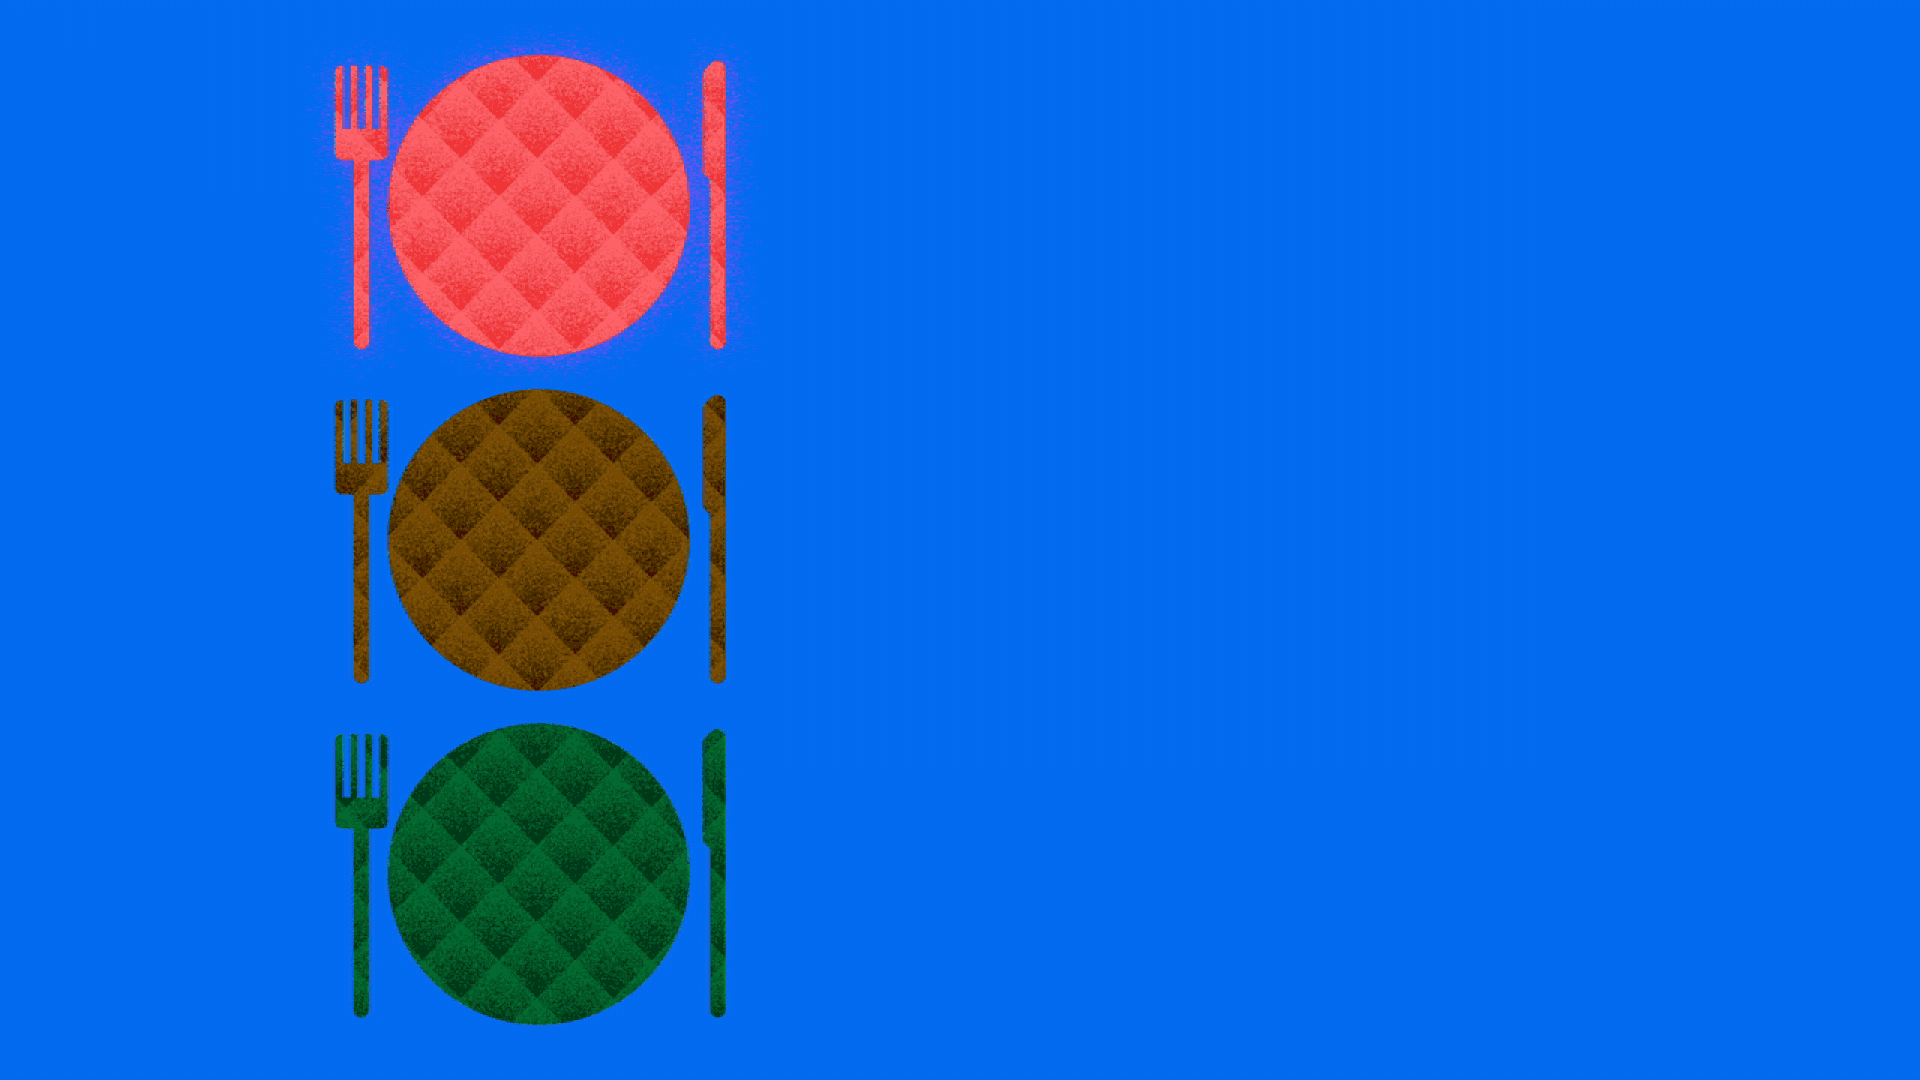 Illustration of a traffic light with place setting shaped lights. 